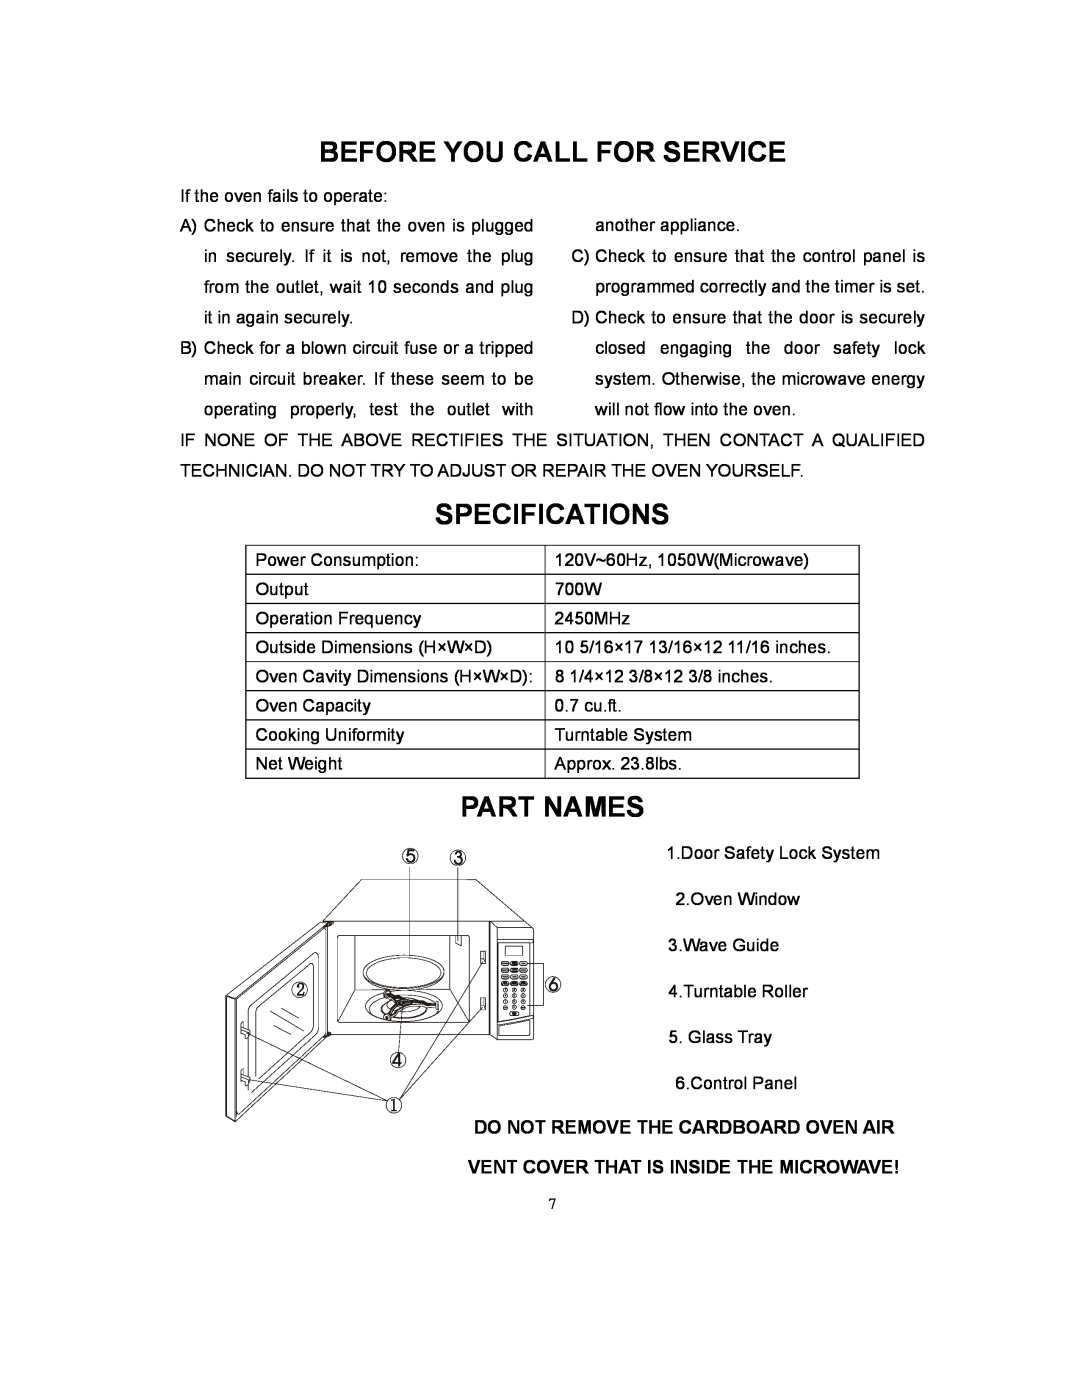 Kenmore 87032 owner manual Before You Call For Service, Specifications, Part Names, Do Not Remove The Cardboard Oven Air 